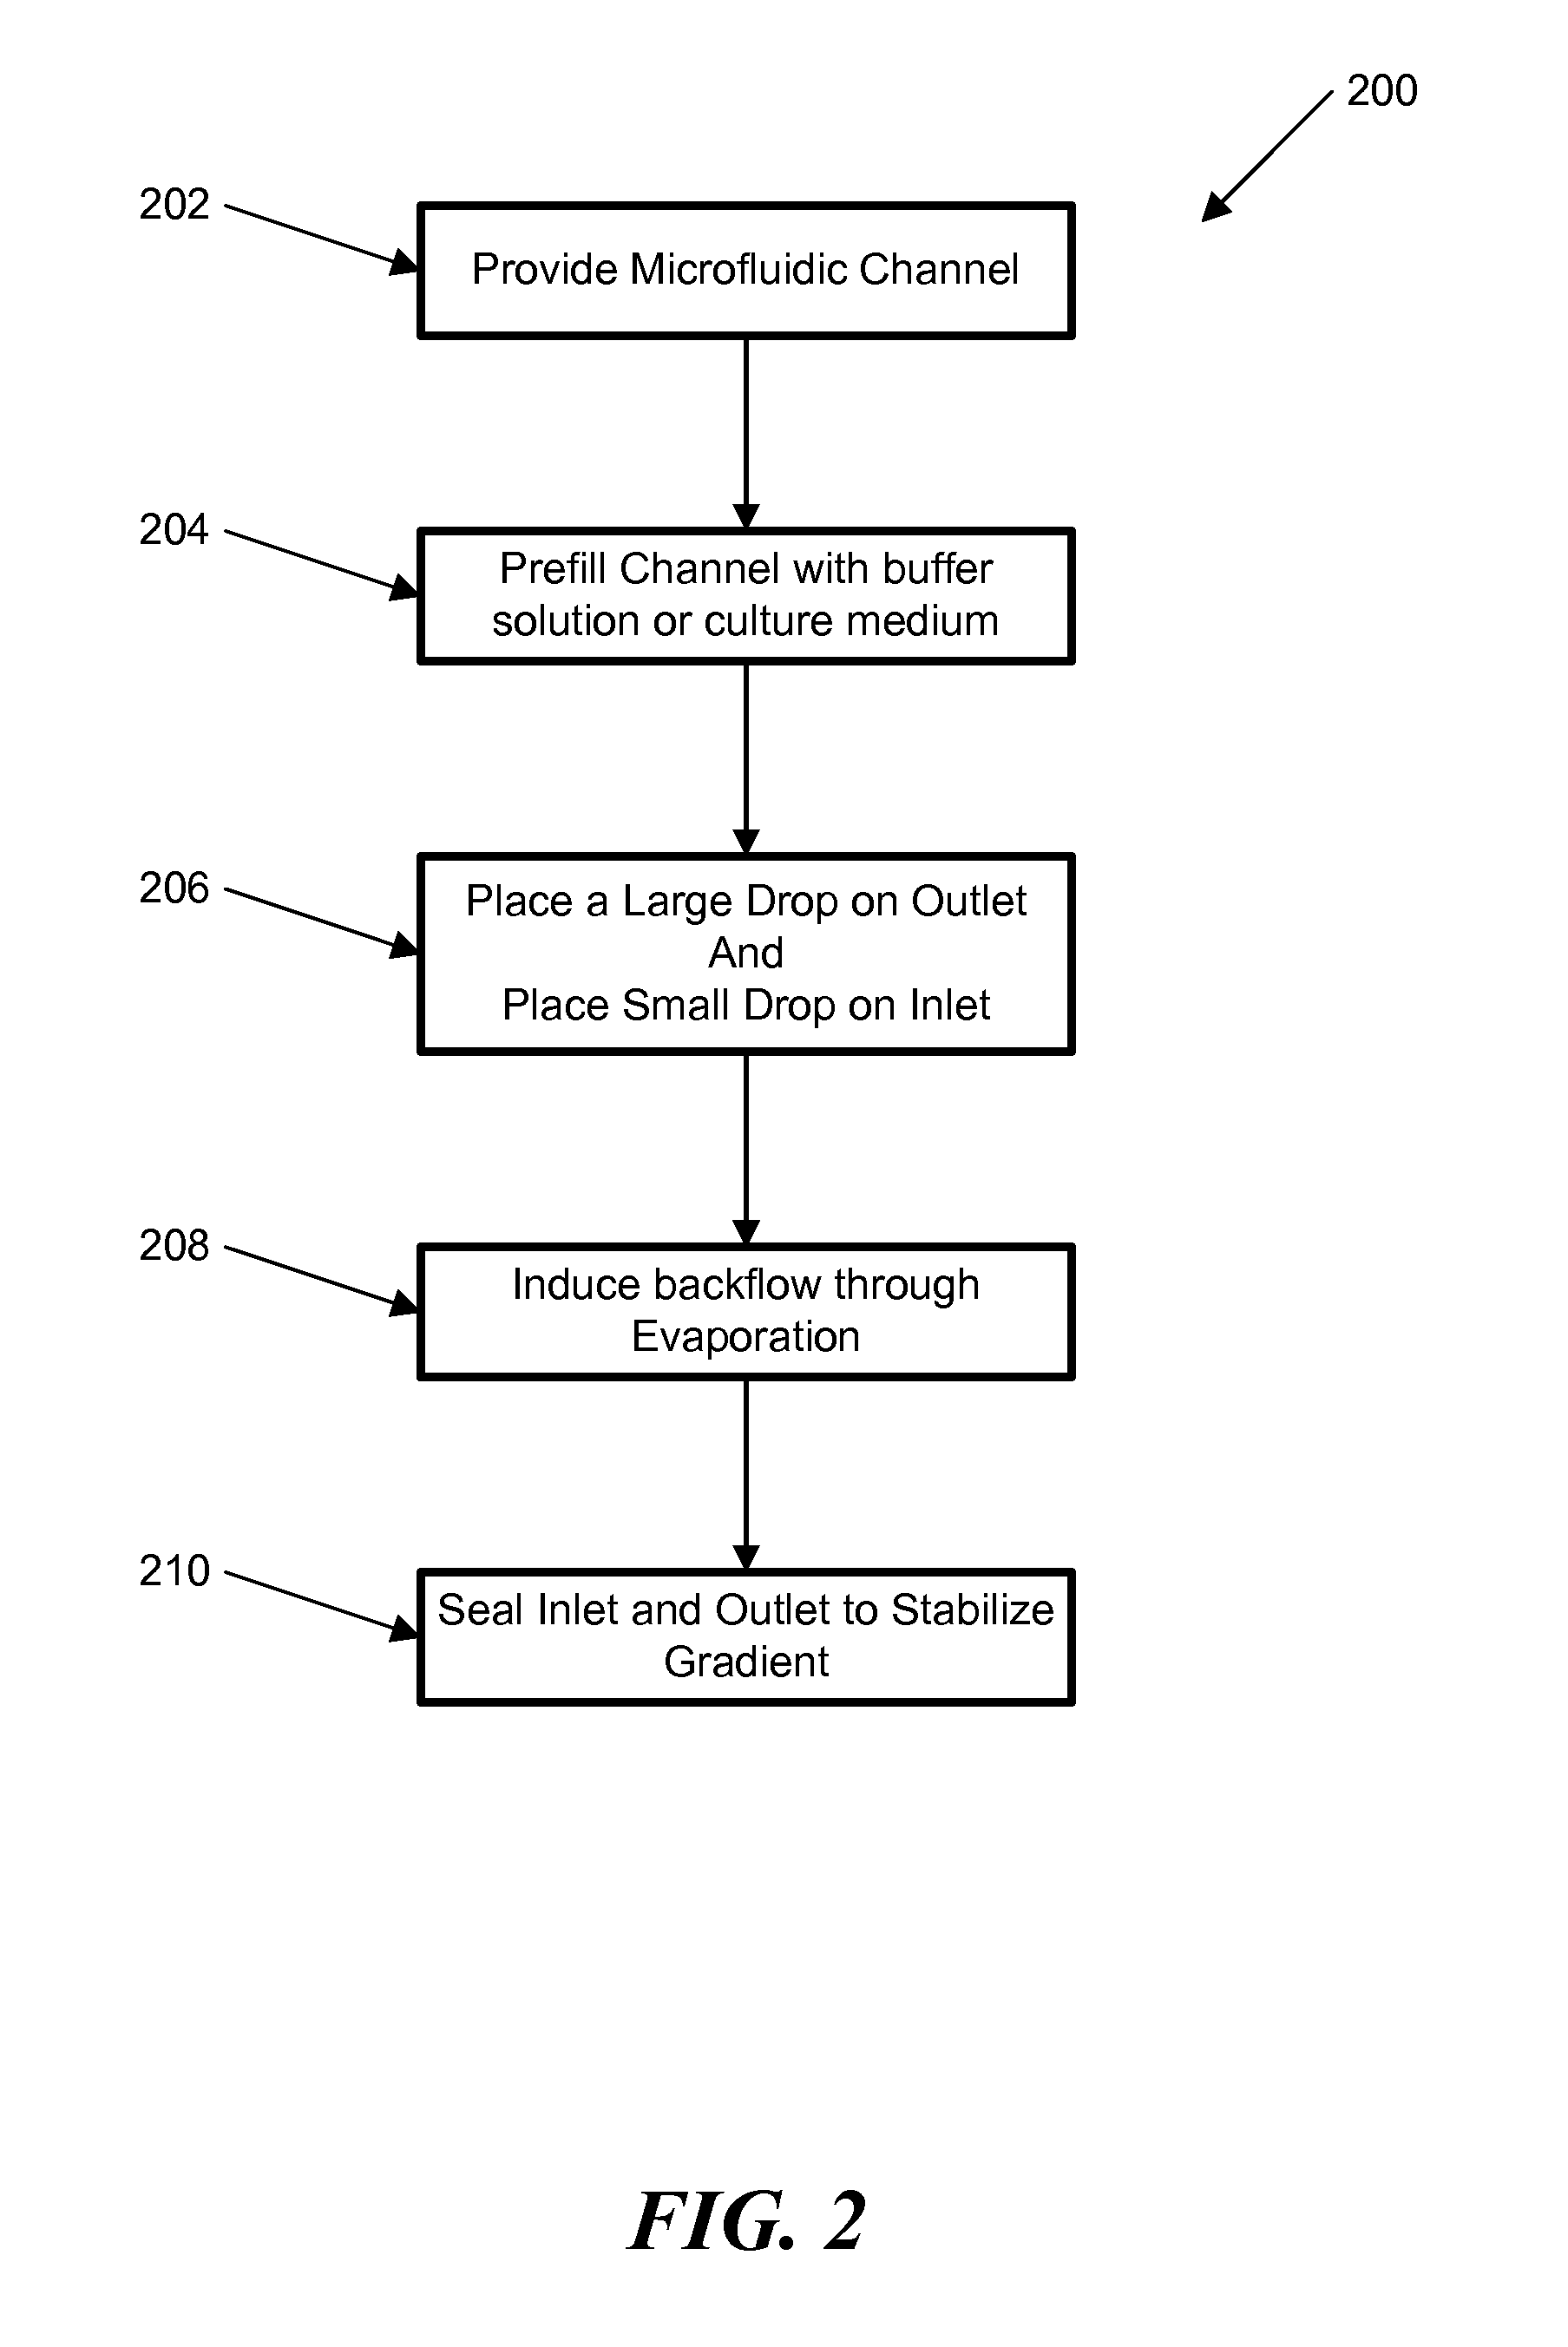 Method and system for generating spatially and temporally controllable concentration gradients